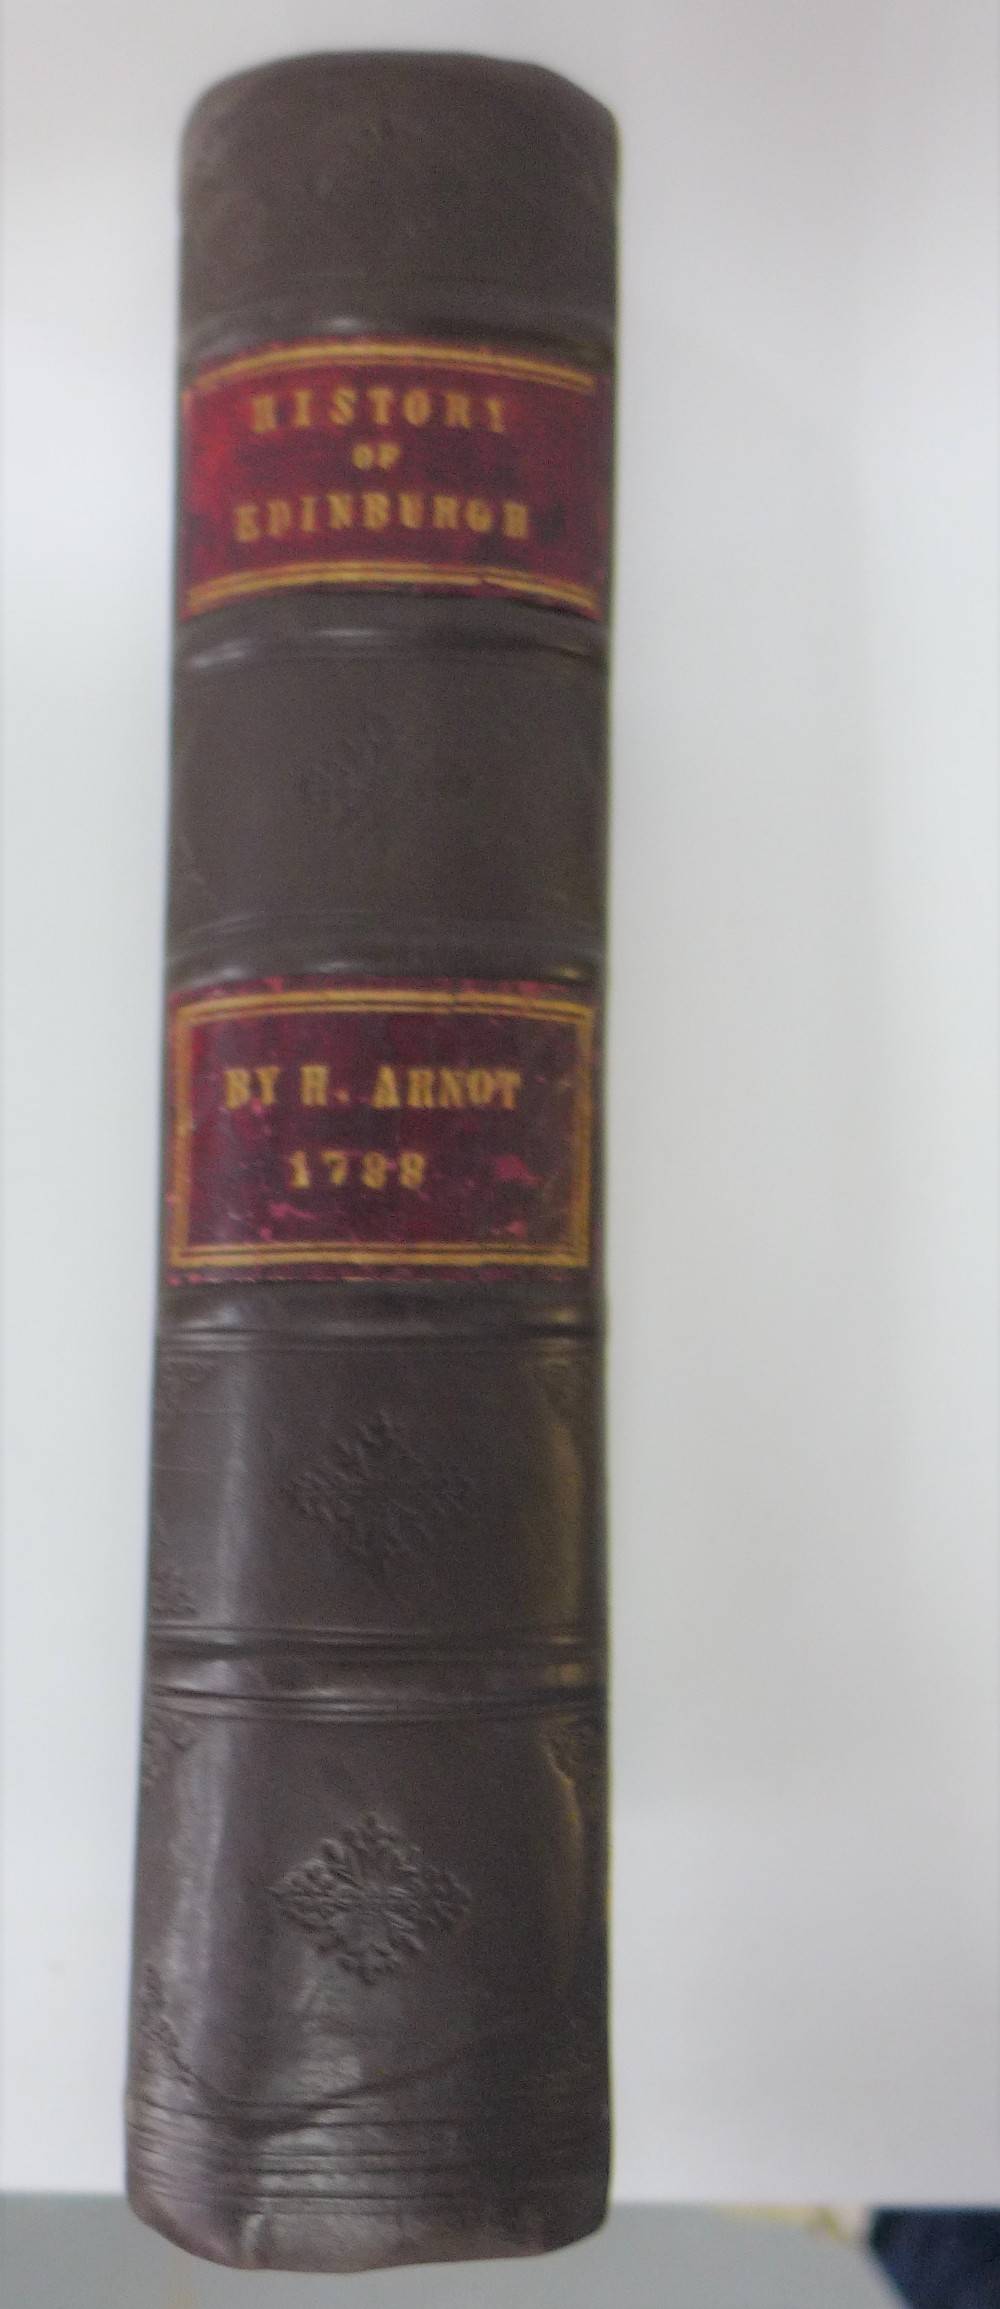 The History of Edinburgh From the Earliest Accounts to the Present Time by Hugo Arnot, printed for